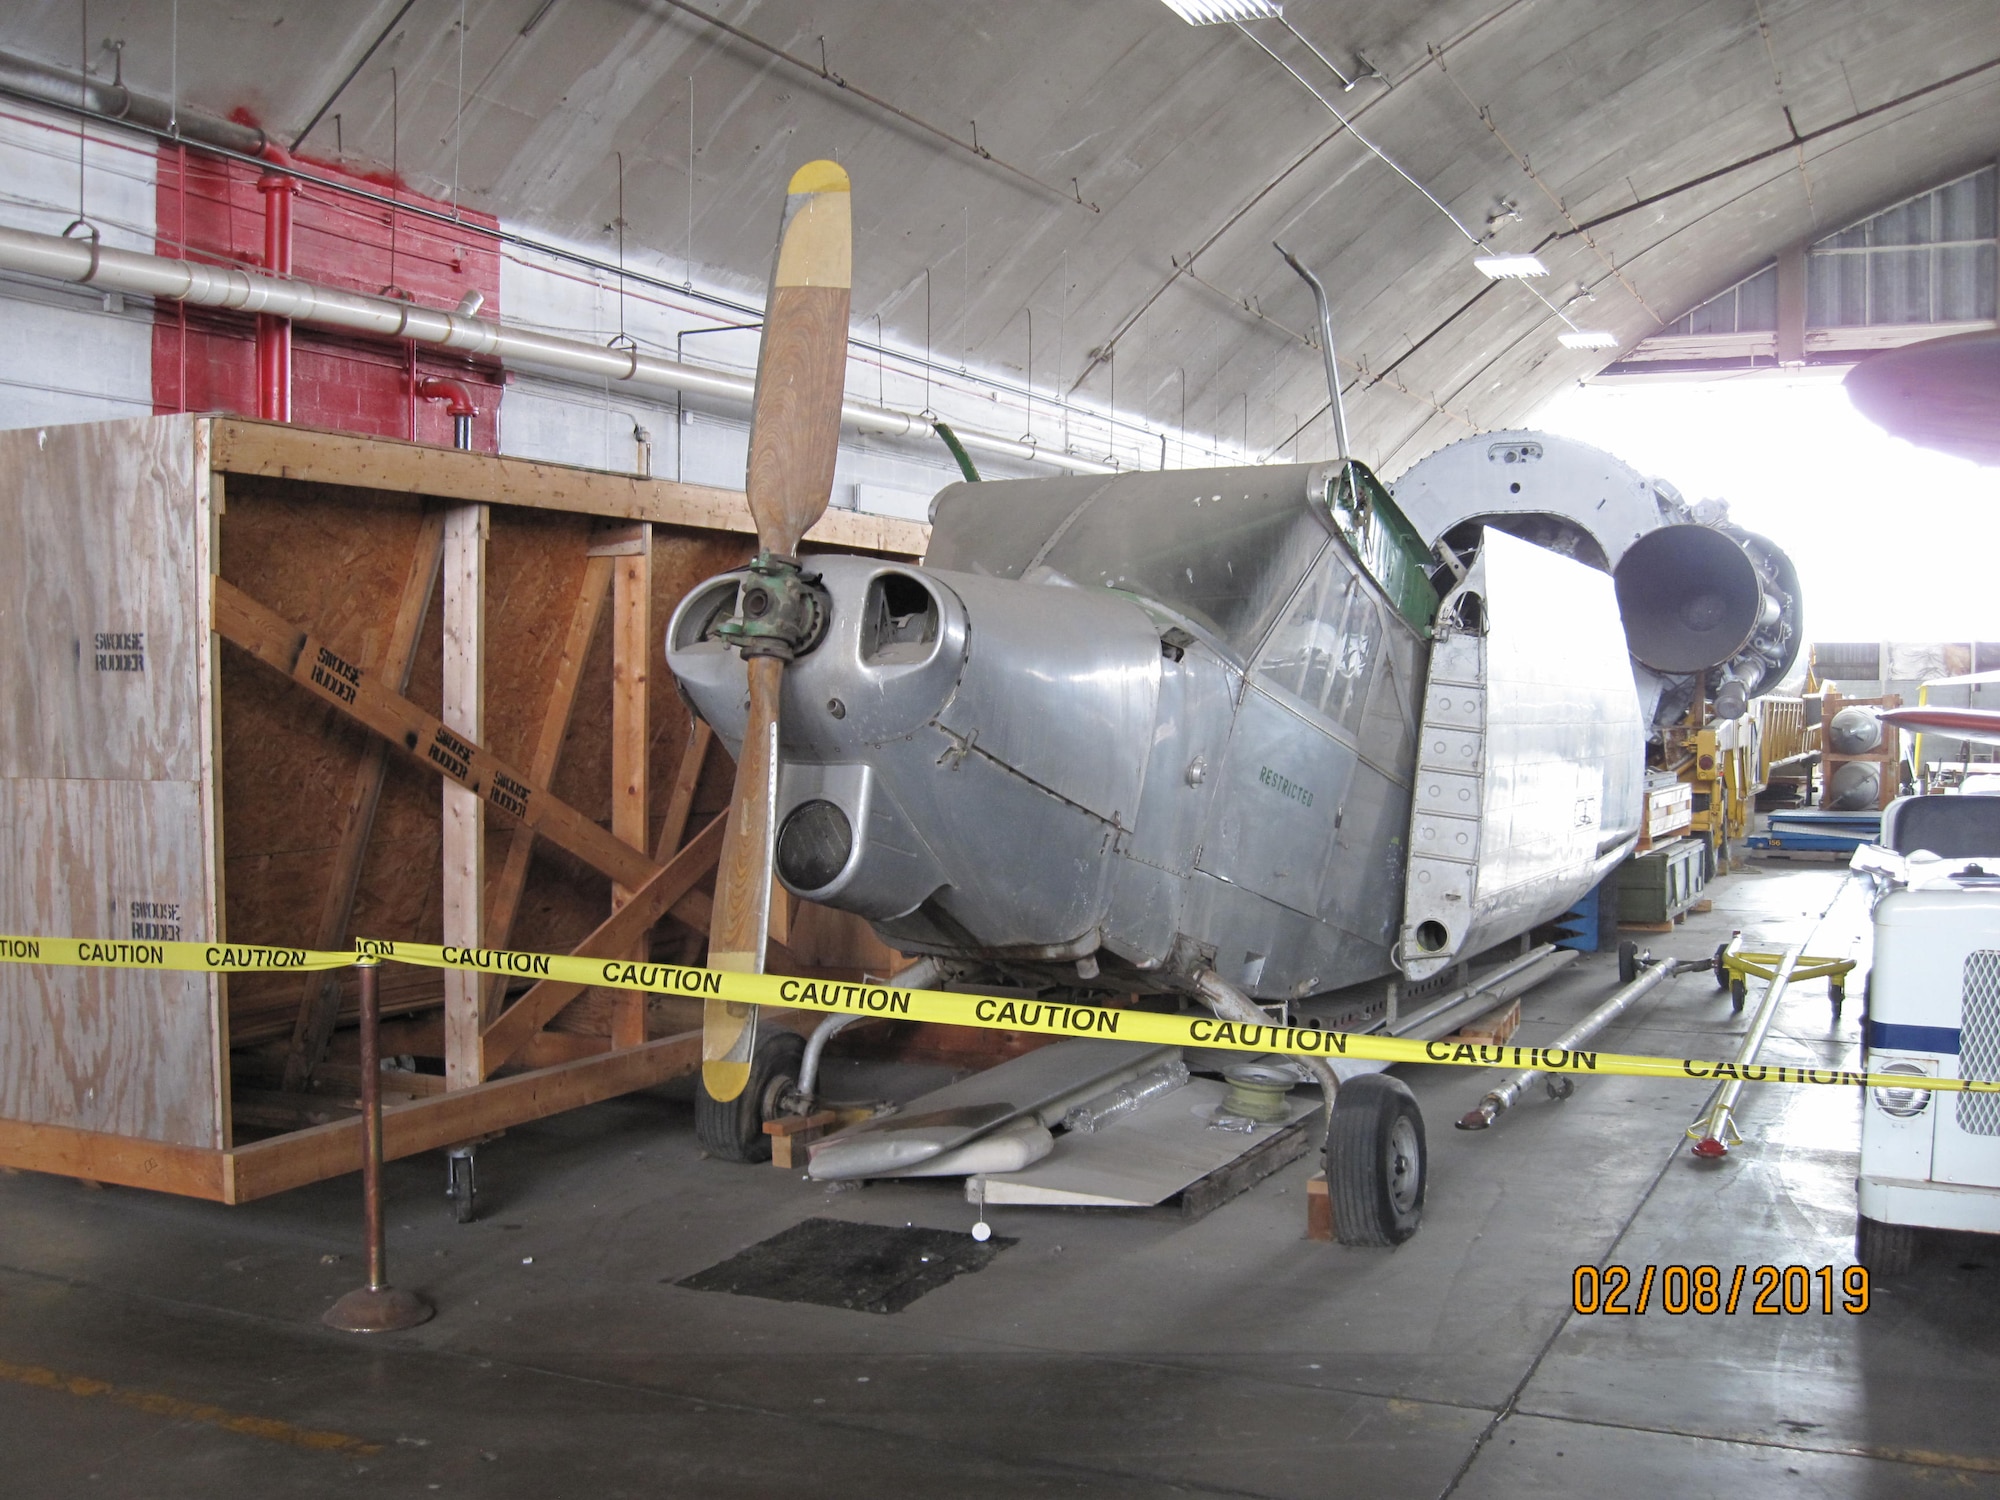 DAYTON, Ohio – 1949 Consolidated Vultee L-13A currently in storage at the National Museum of the United States Air Force. (U.S. Air Force photo)